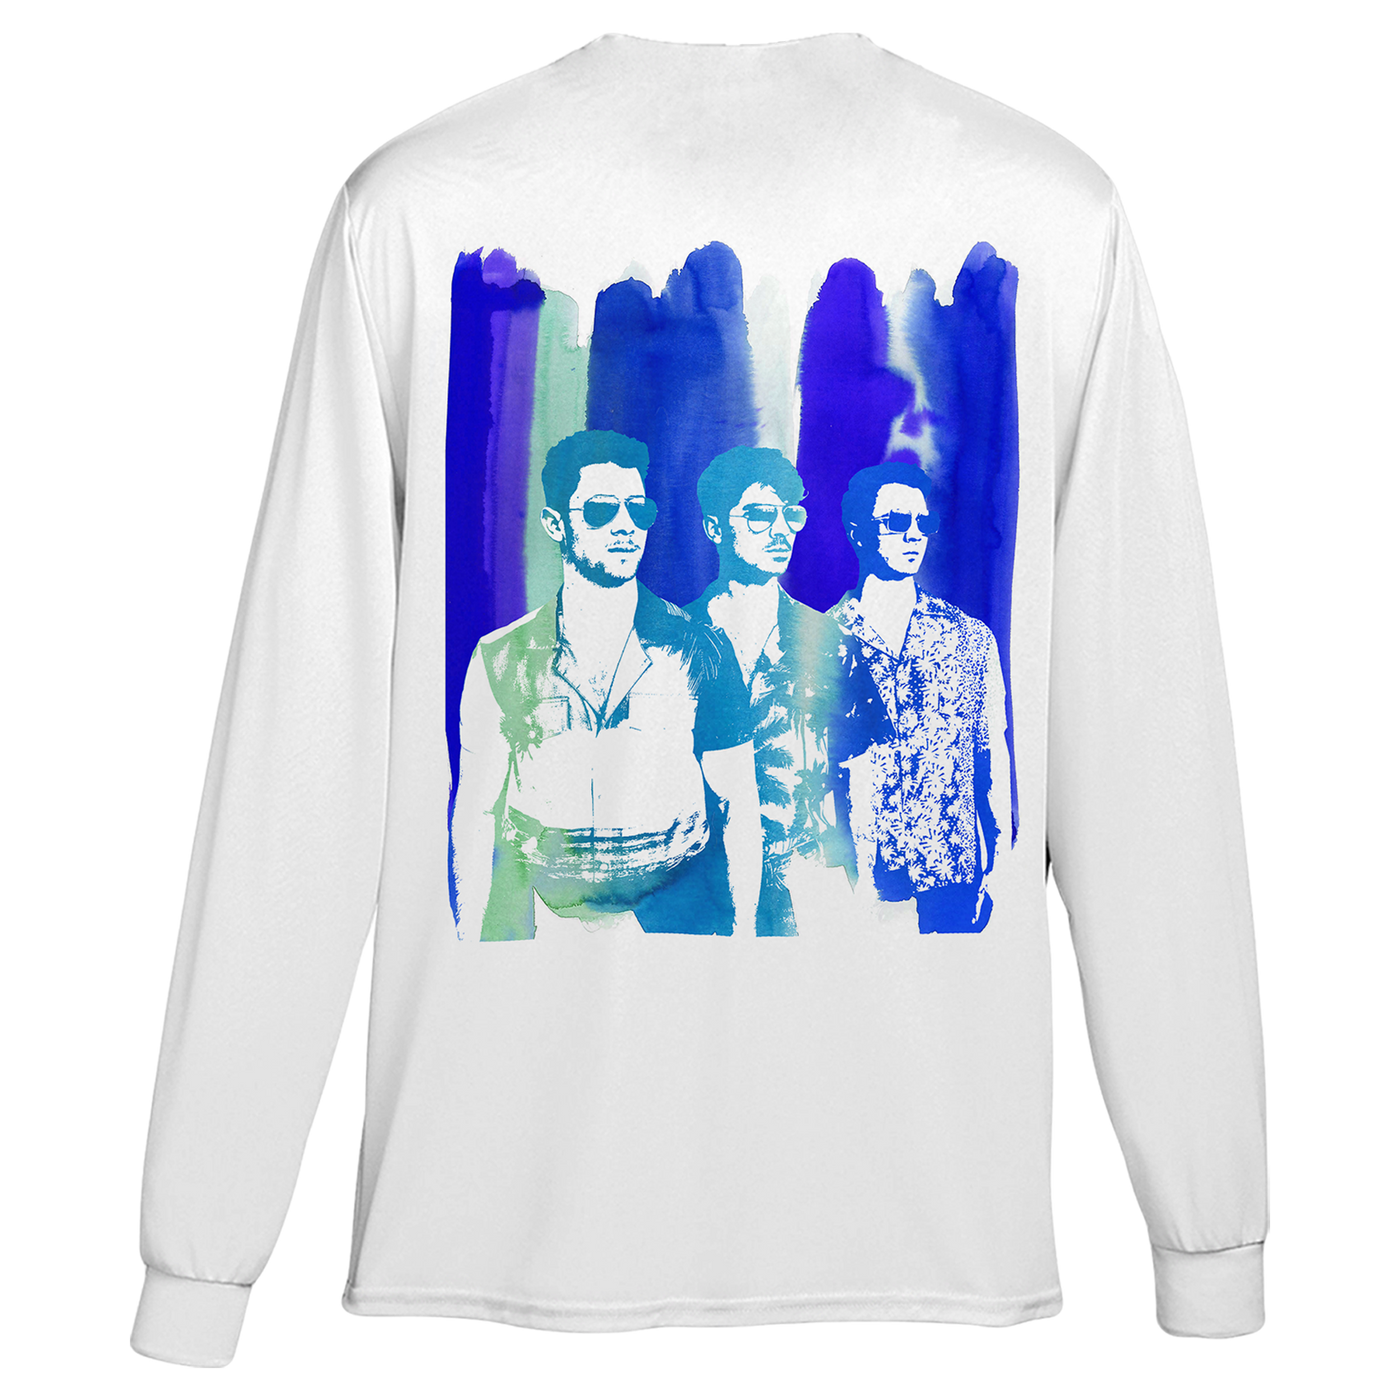 COOL LONG SLEEVE - Jonas Brothers Official